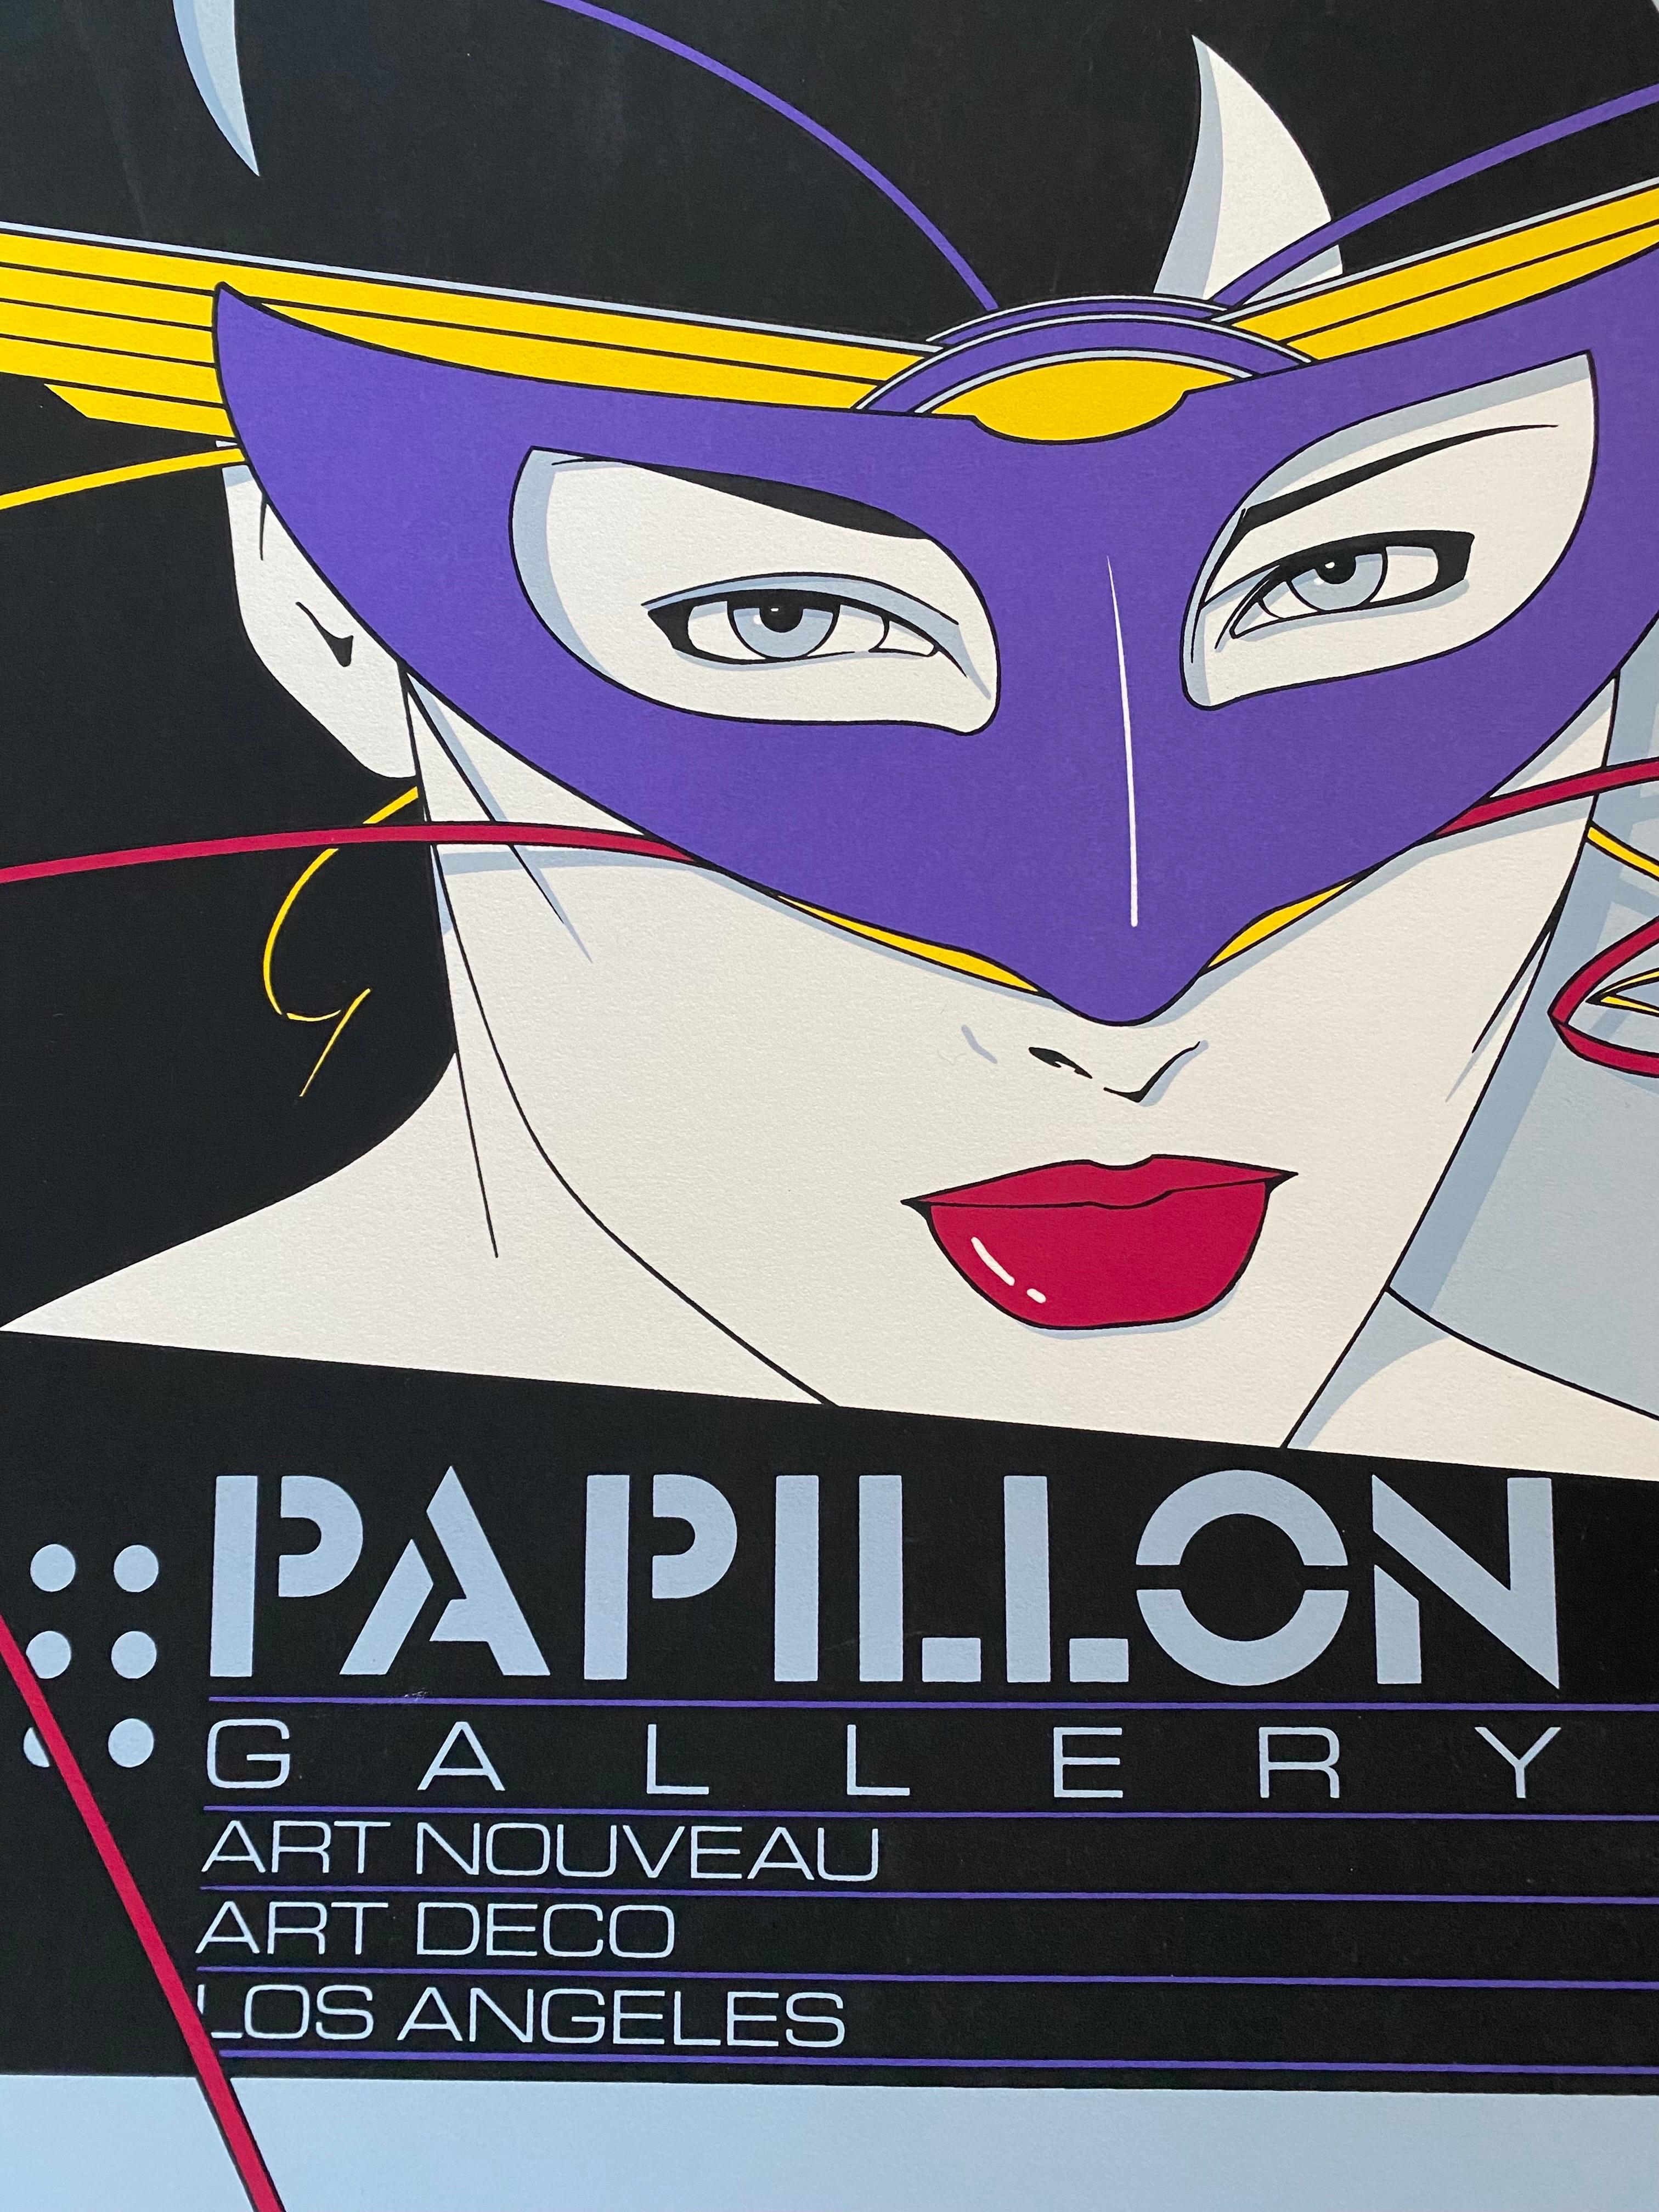 🎨 Dive into the timeless elegance of Patrick Nagel's iconic artwork with this excellent 1981 serigraph, published by Mirage Editions for Papillon Gallery in Los Angeles. Crafted with meticulous detail, this piece encapsulates Nagel's signature